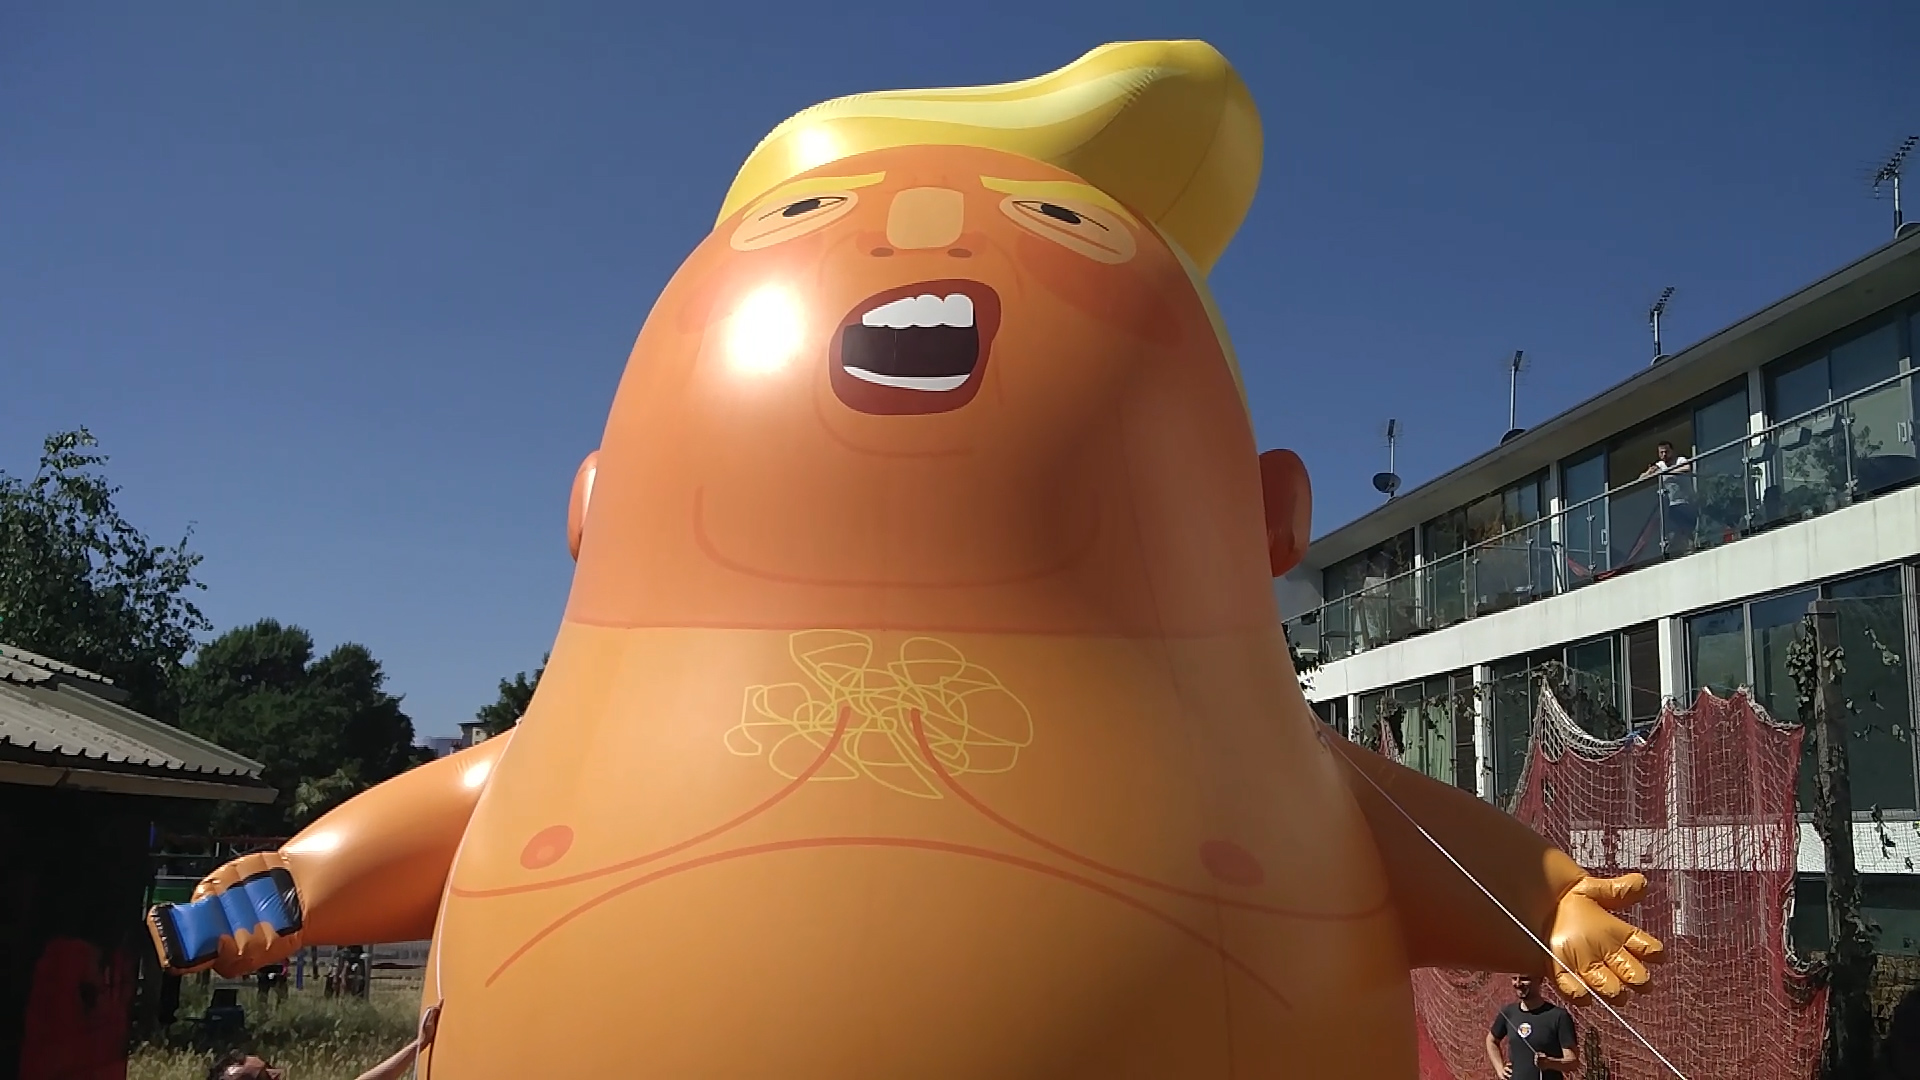 A six-meter high balloon depicting a baby Donald Trump in a diaper was unveiled June 26 in London, ahead of the U.S. President's July 13 visit to the U.K. (Billy Perrigo—TIME)